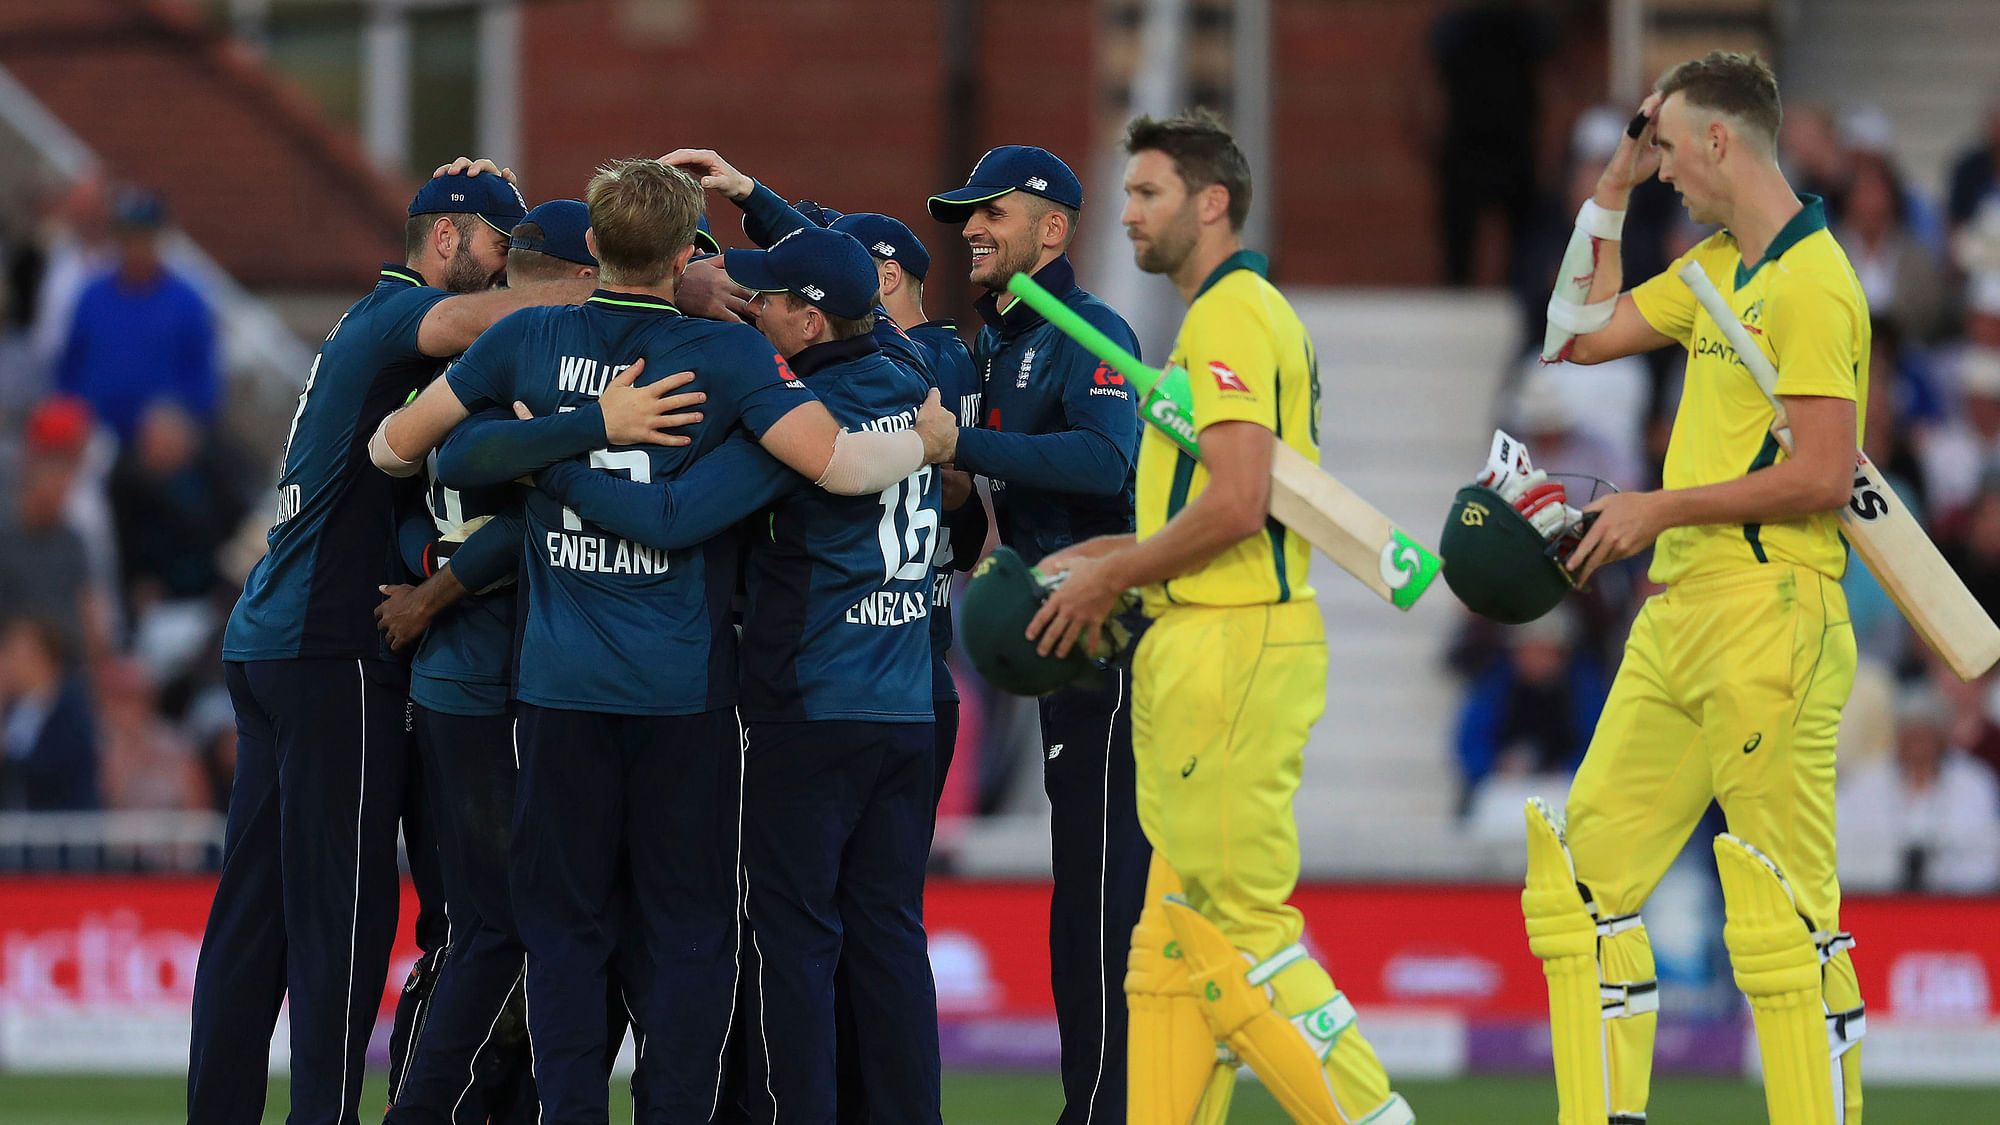 England players celebrate victory after the final wicket  during the One Day International match at Trent Bridge, Nottingham.